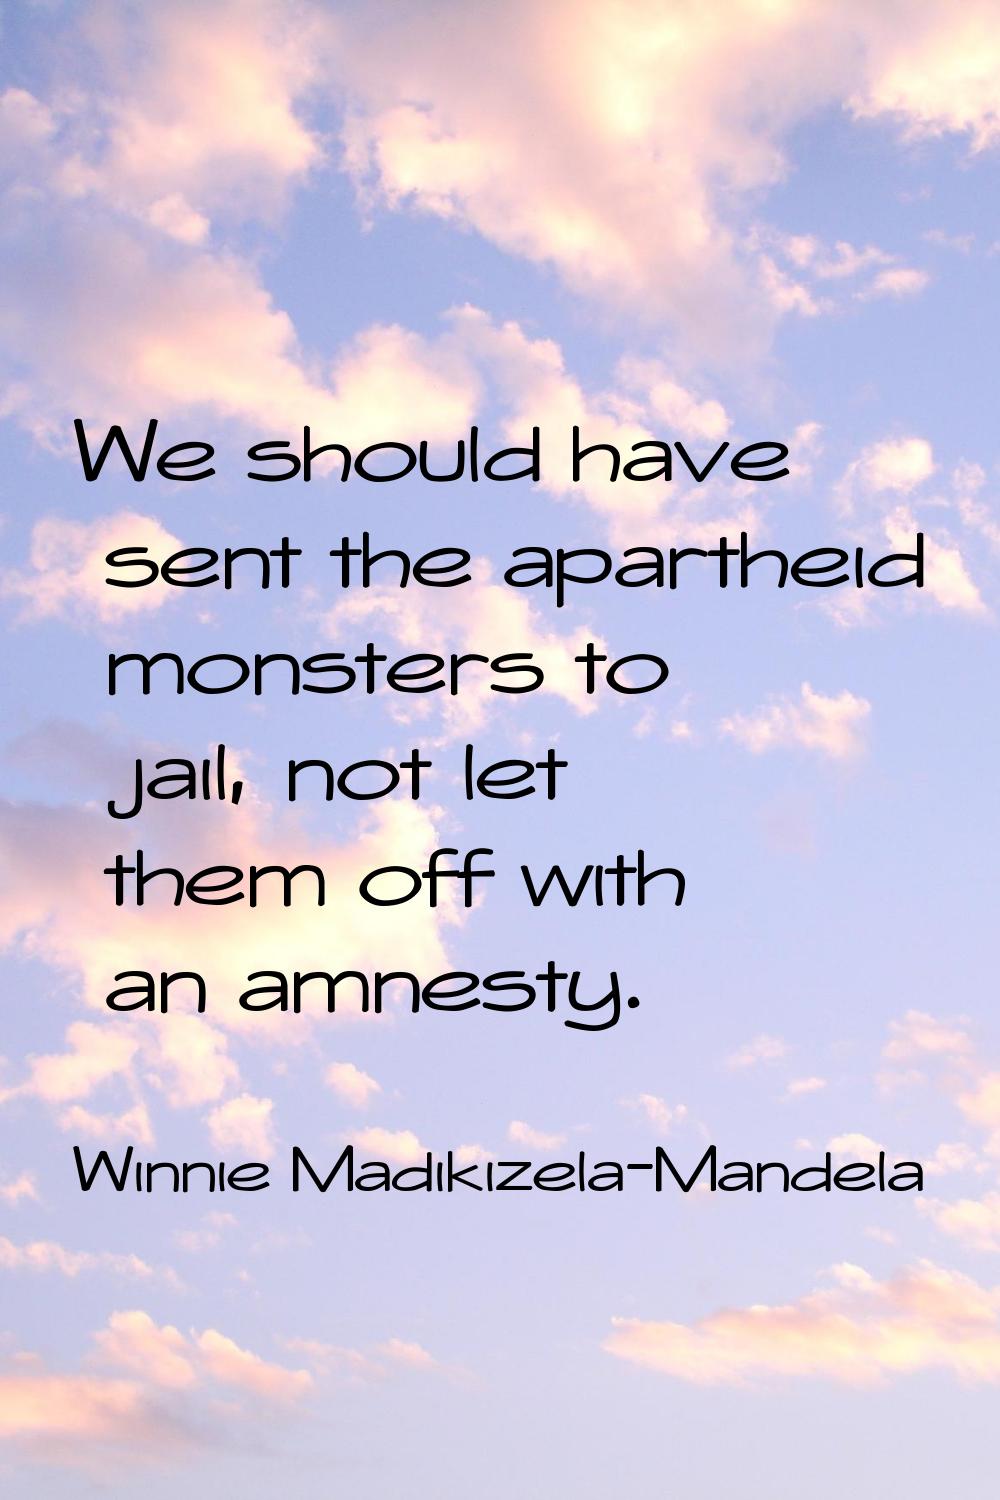 We should have sent the apartheid monsters to jail, not let them off with an amnesty.